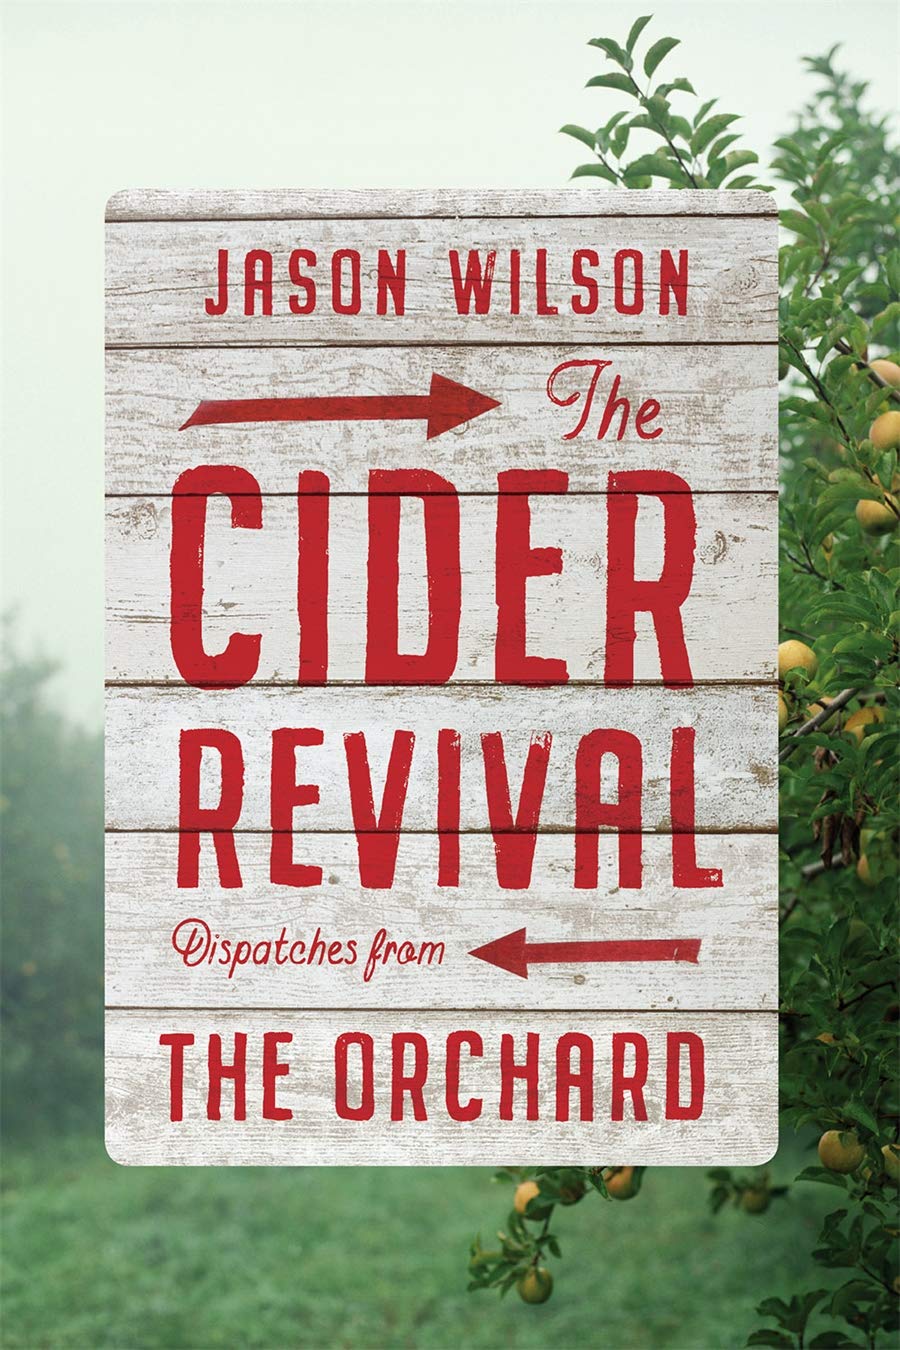 Cider Revival: Dispatches from the Orchard (Jason Wilson)